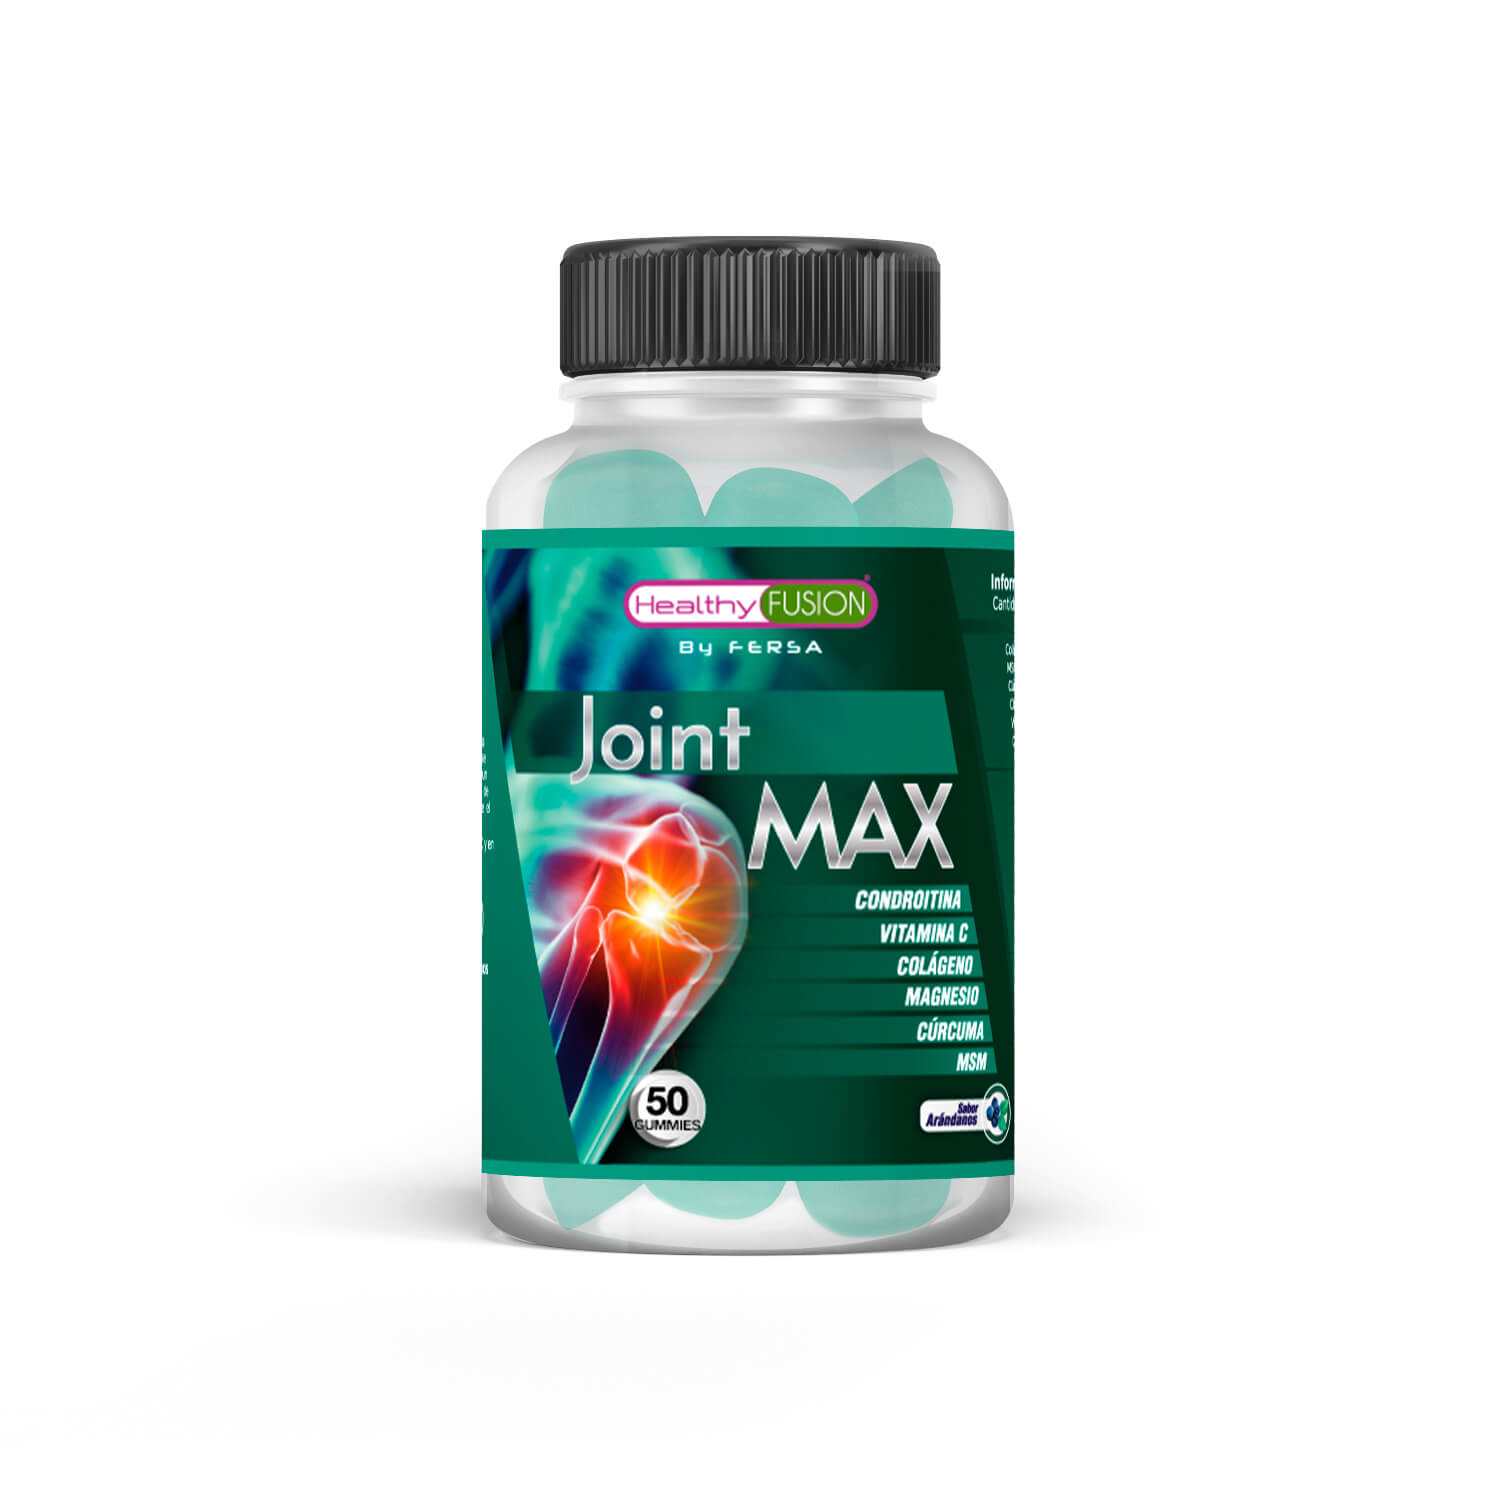 Healthy Fusion - Joint Max